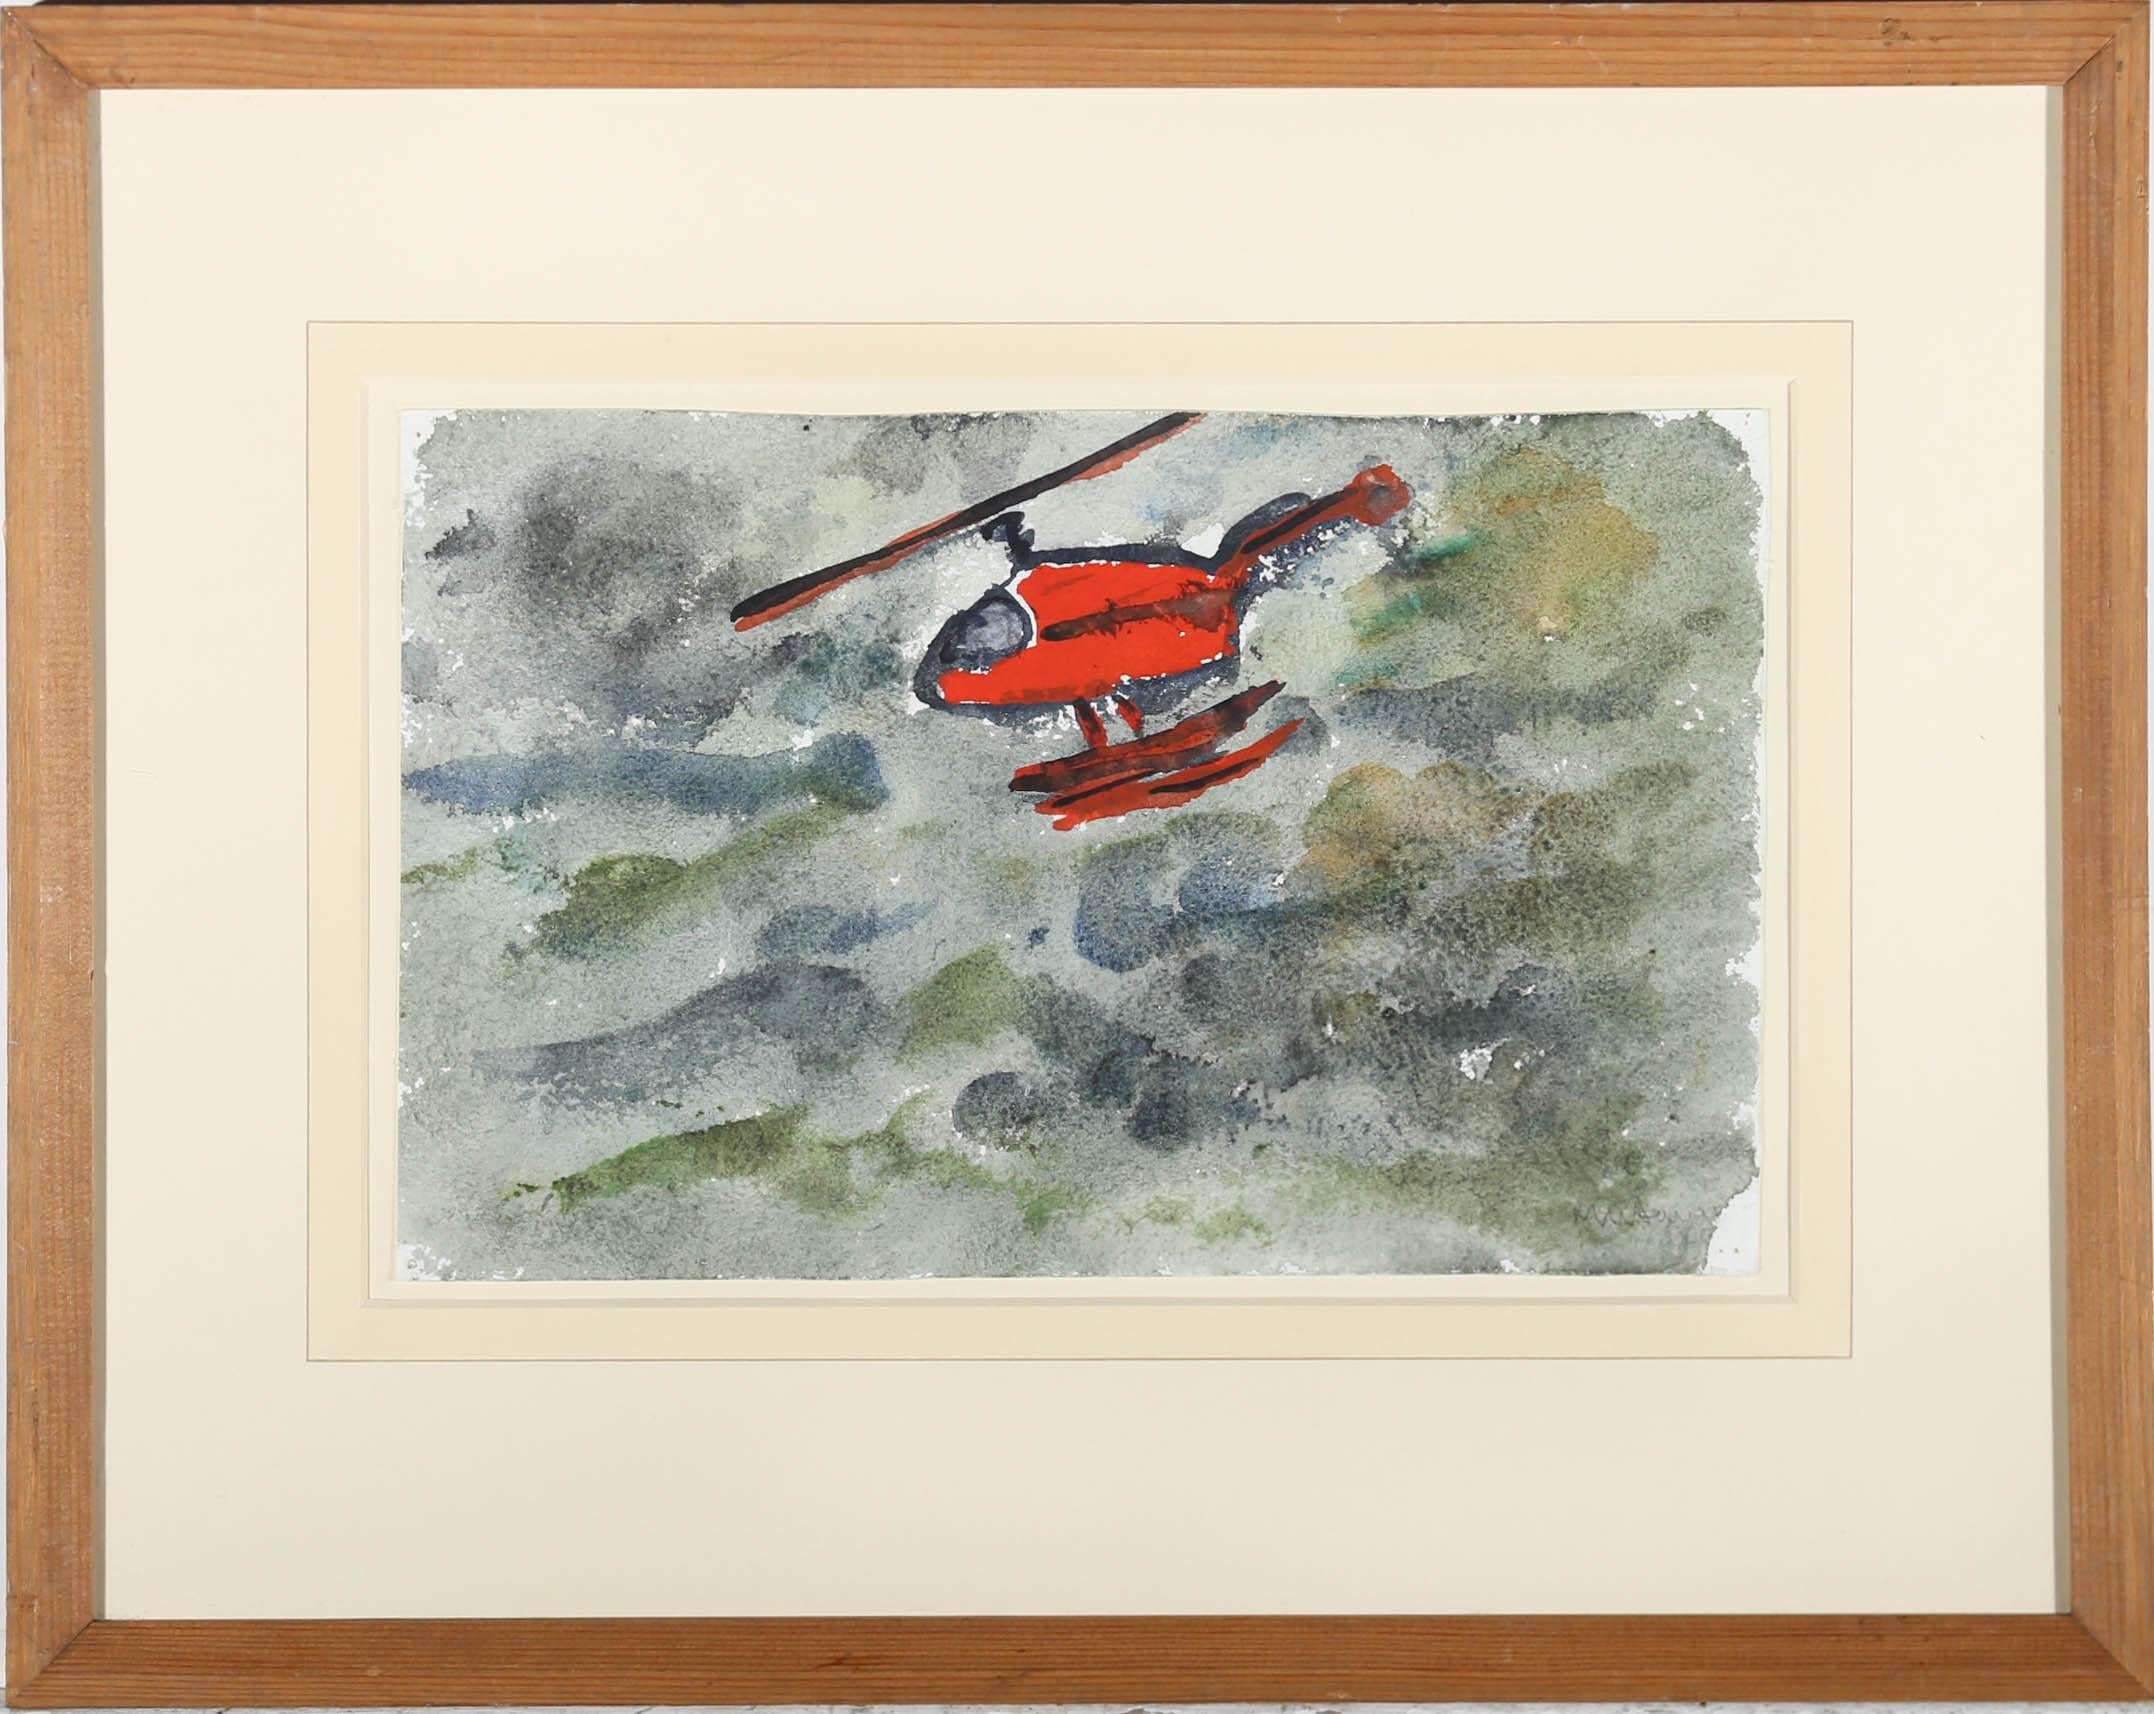 An original watercolour by contemporary artist Michael Davies (b.1947)- Little Red Chopper. Well-presented in a natural wood frame with a crisp wash-line mount. Signed to the lower right. On watercolour paper.
